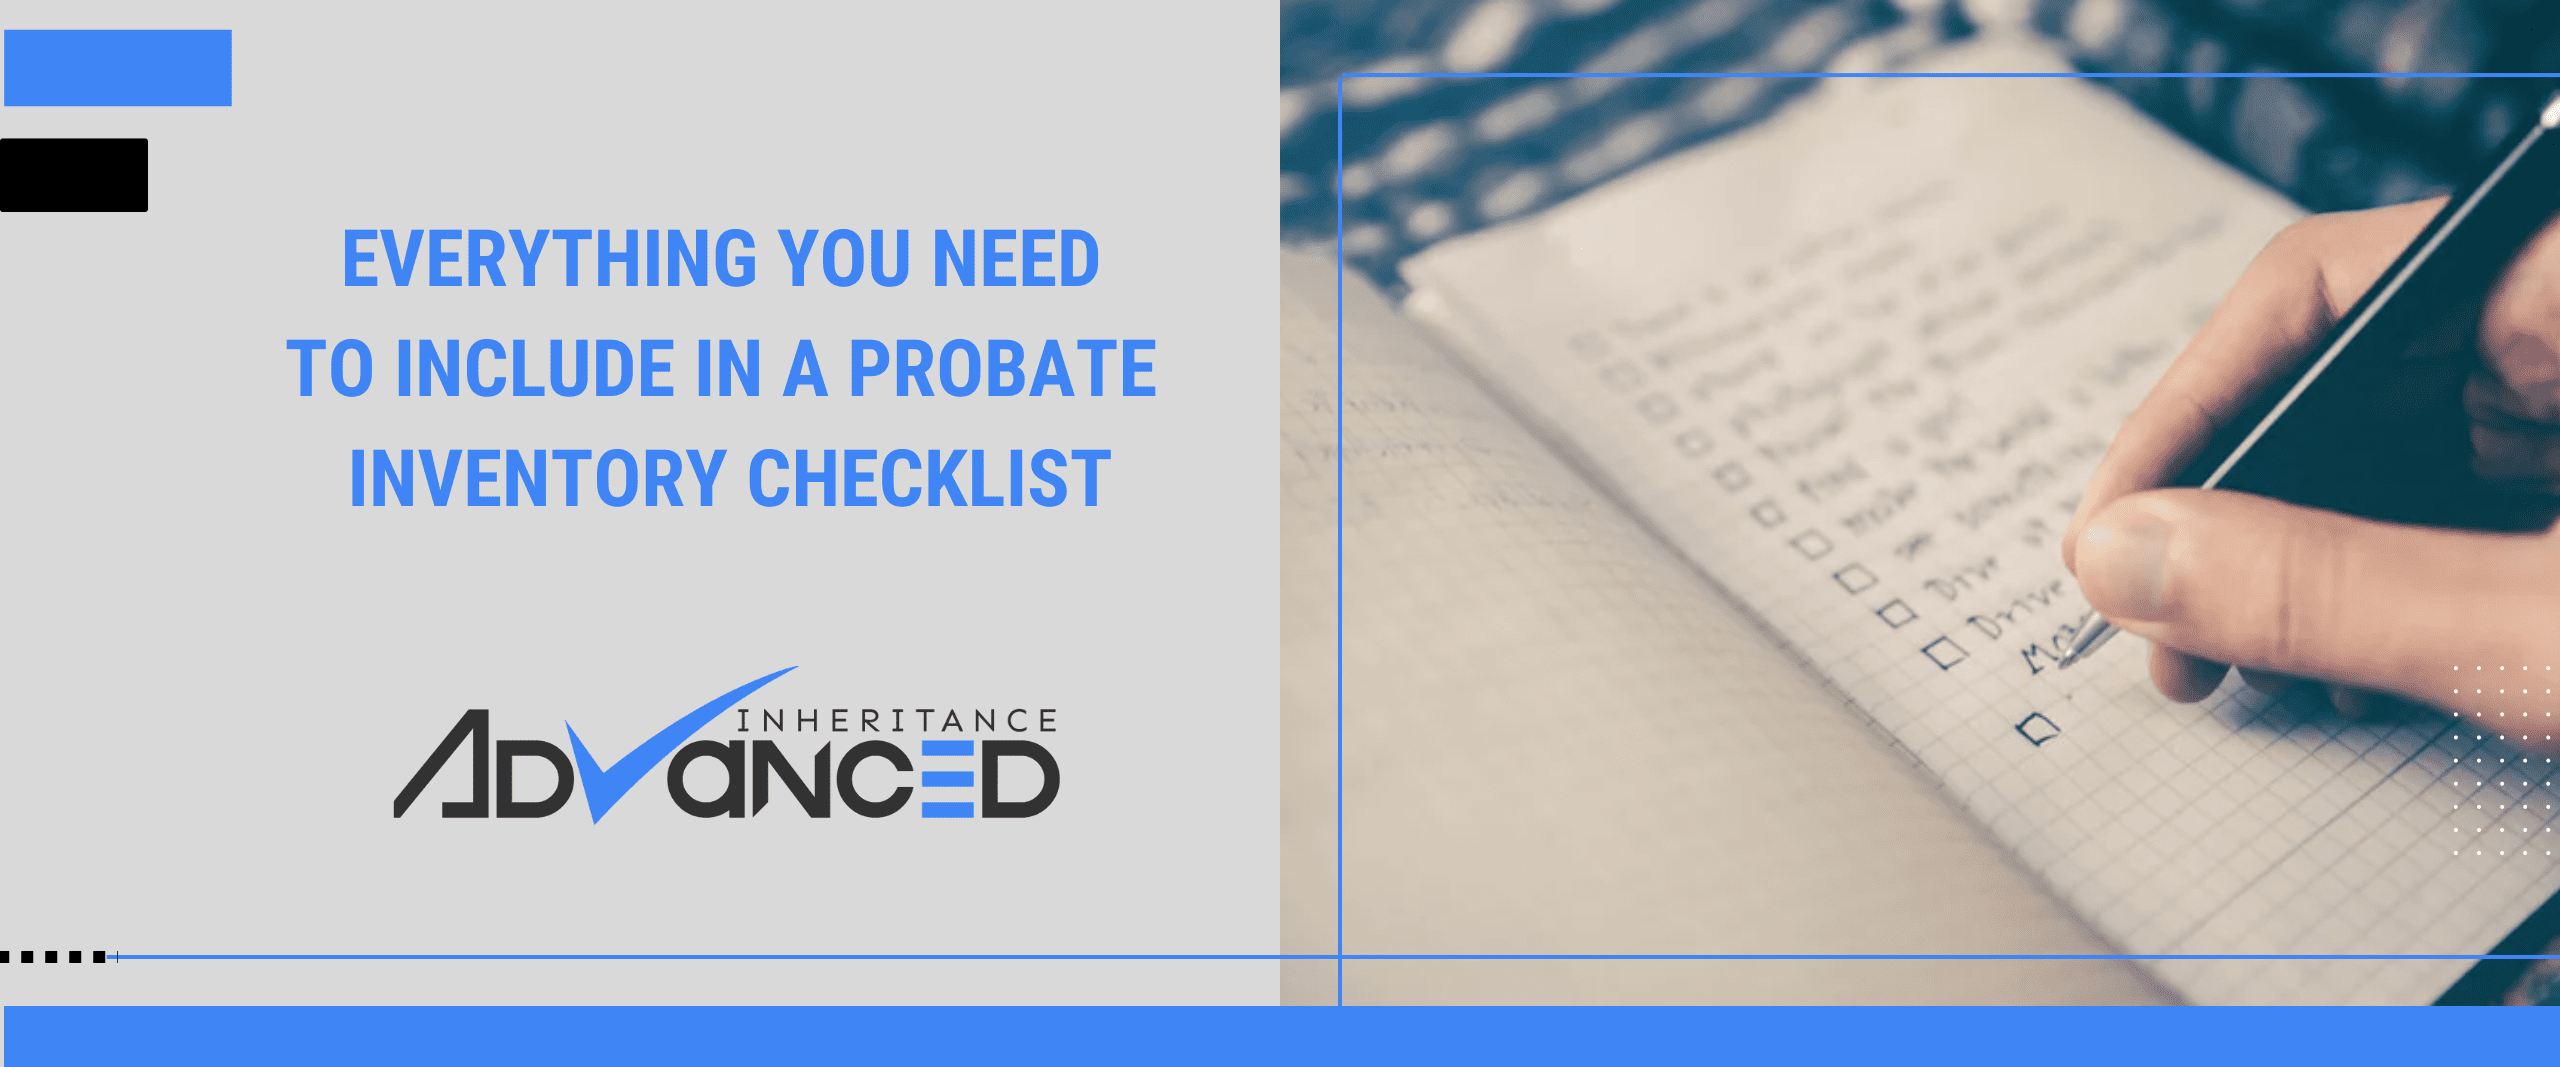 Everything You Need to Include in a Probate Inventory Checklist